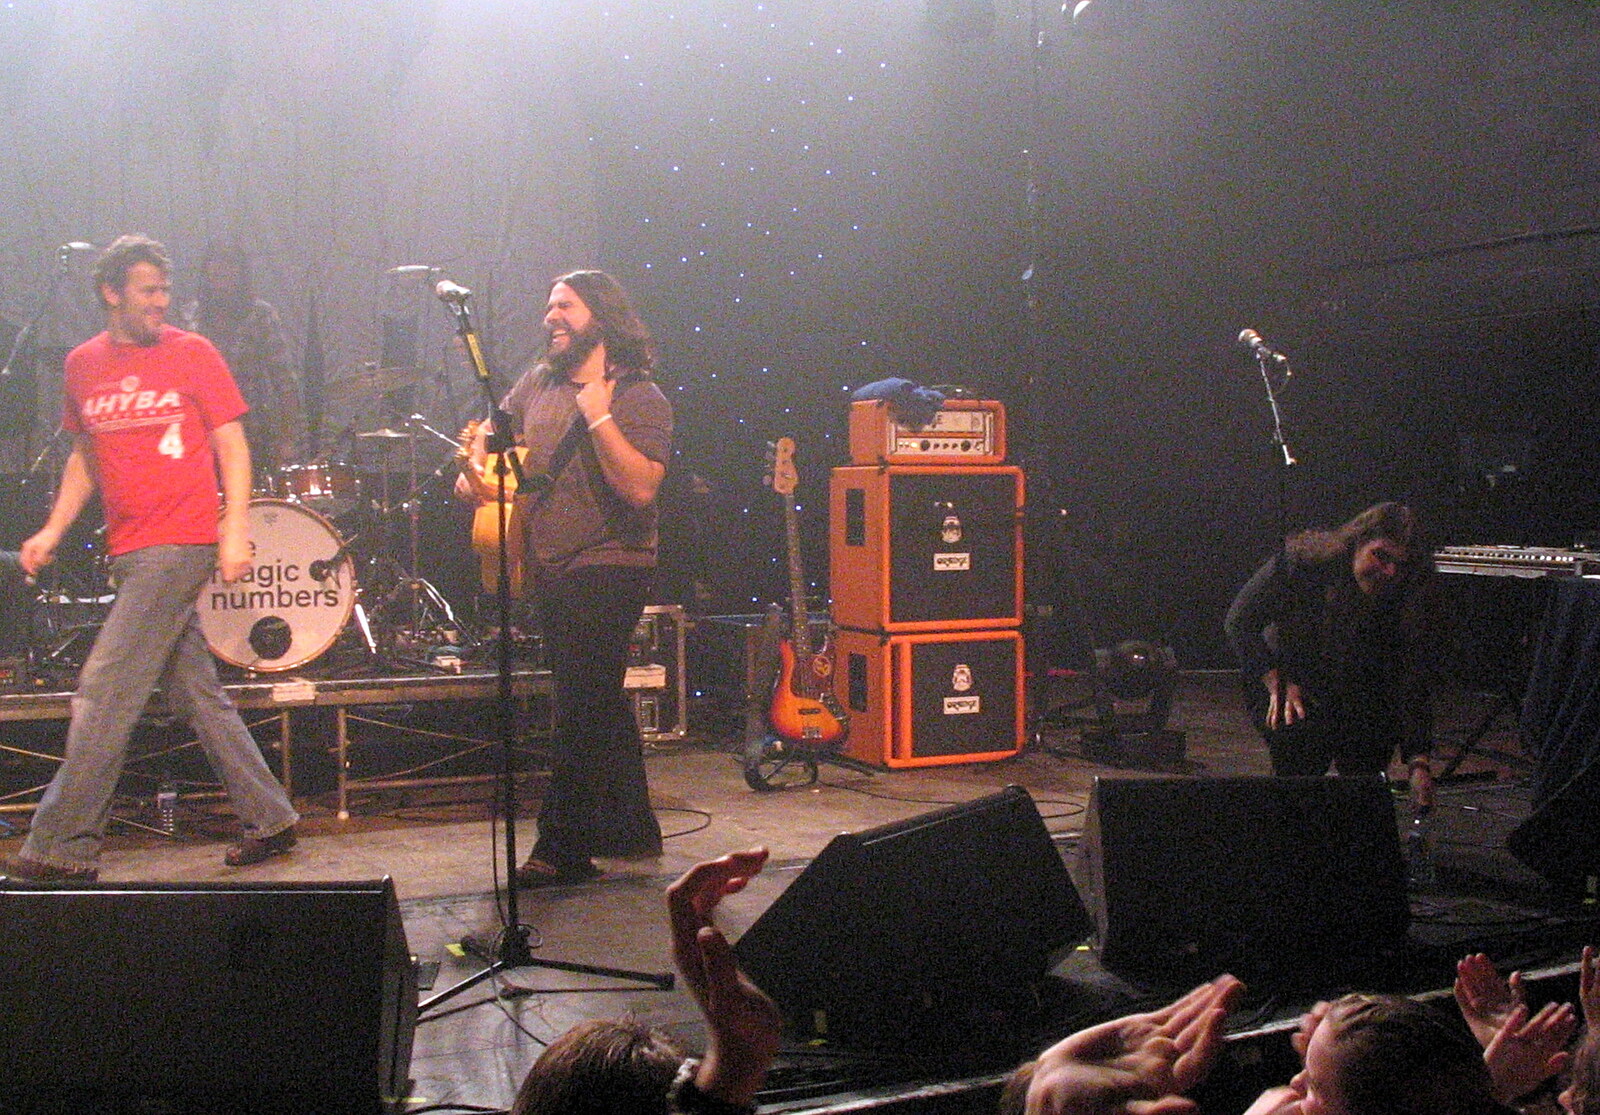 The Magic Numbers and Scenes of Diss, Norfolk - 15th October 2005: On stage in the Lower Common Room